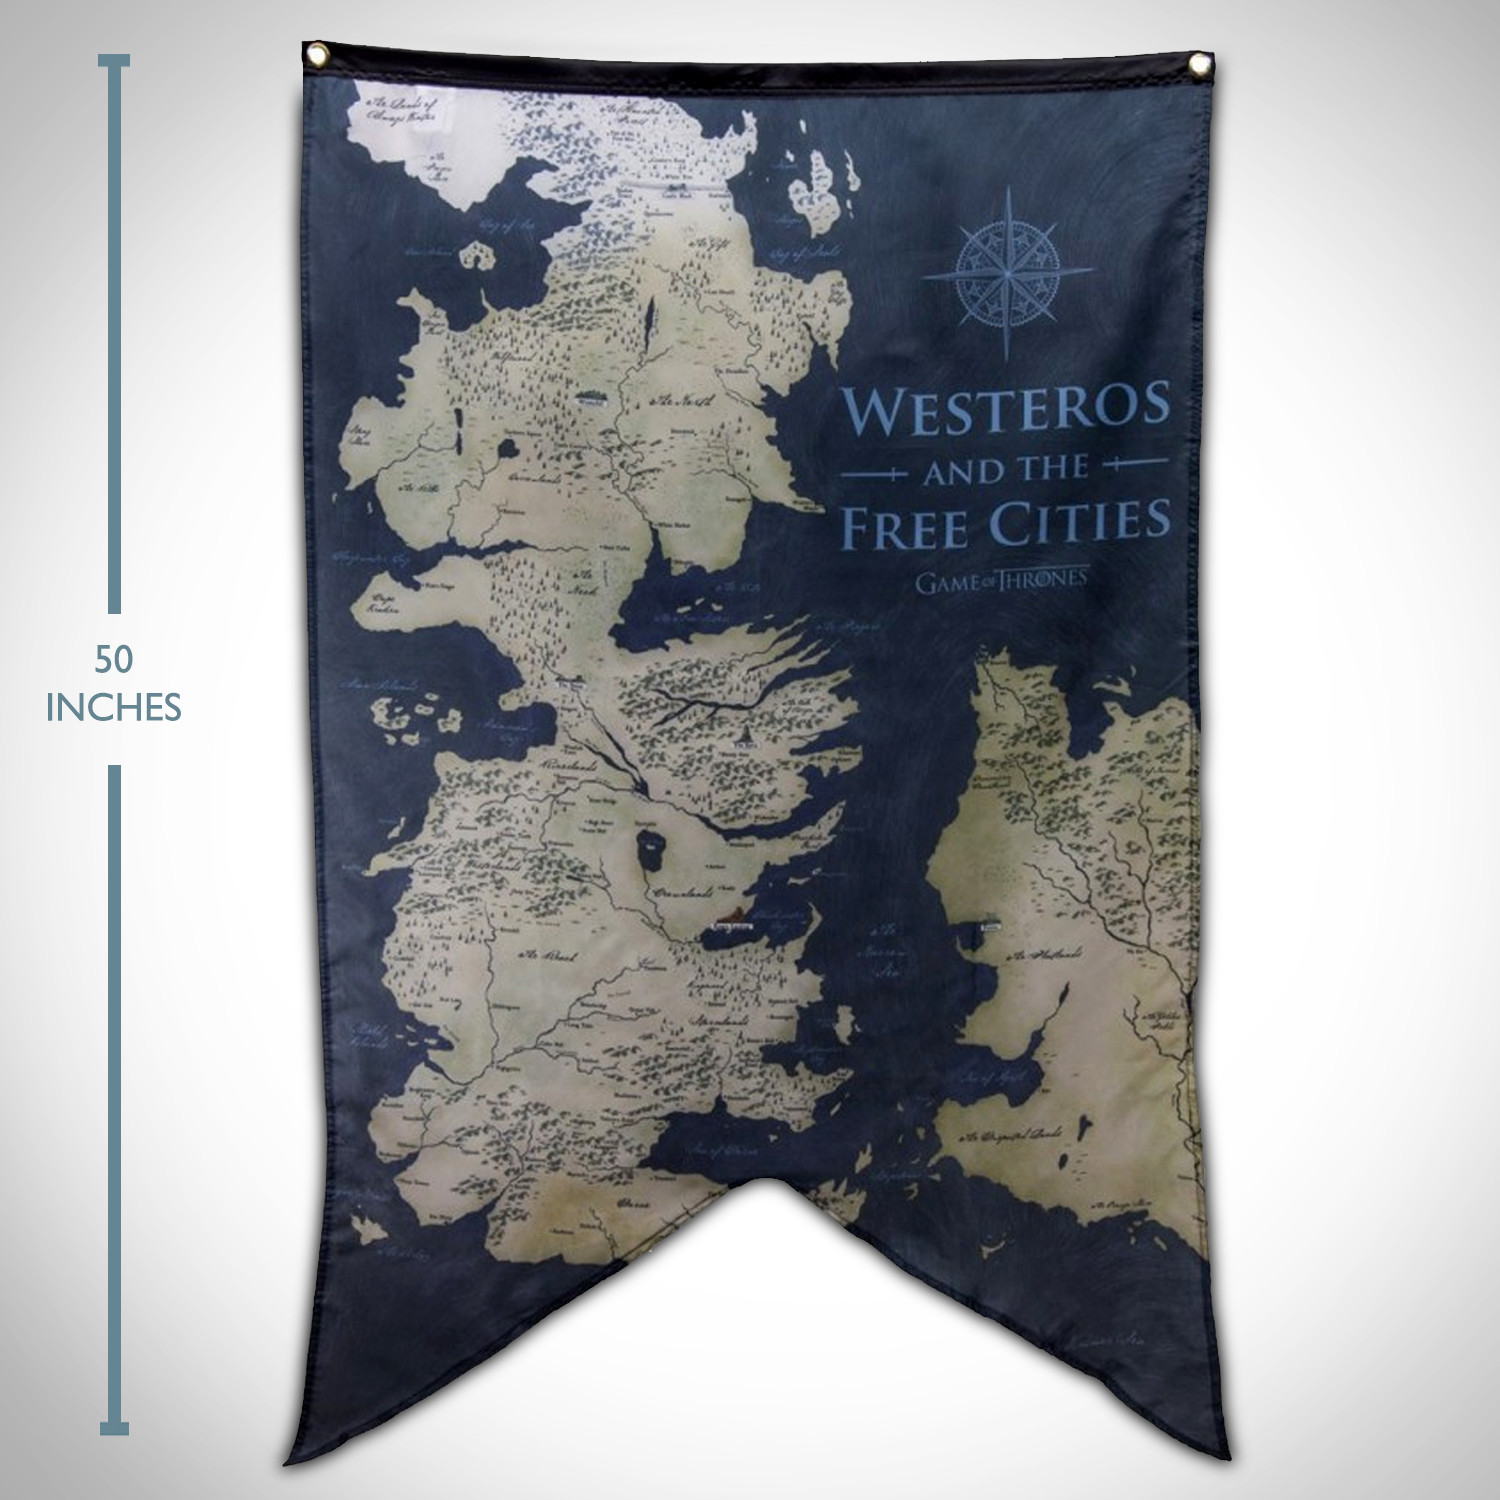 Westeros banners